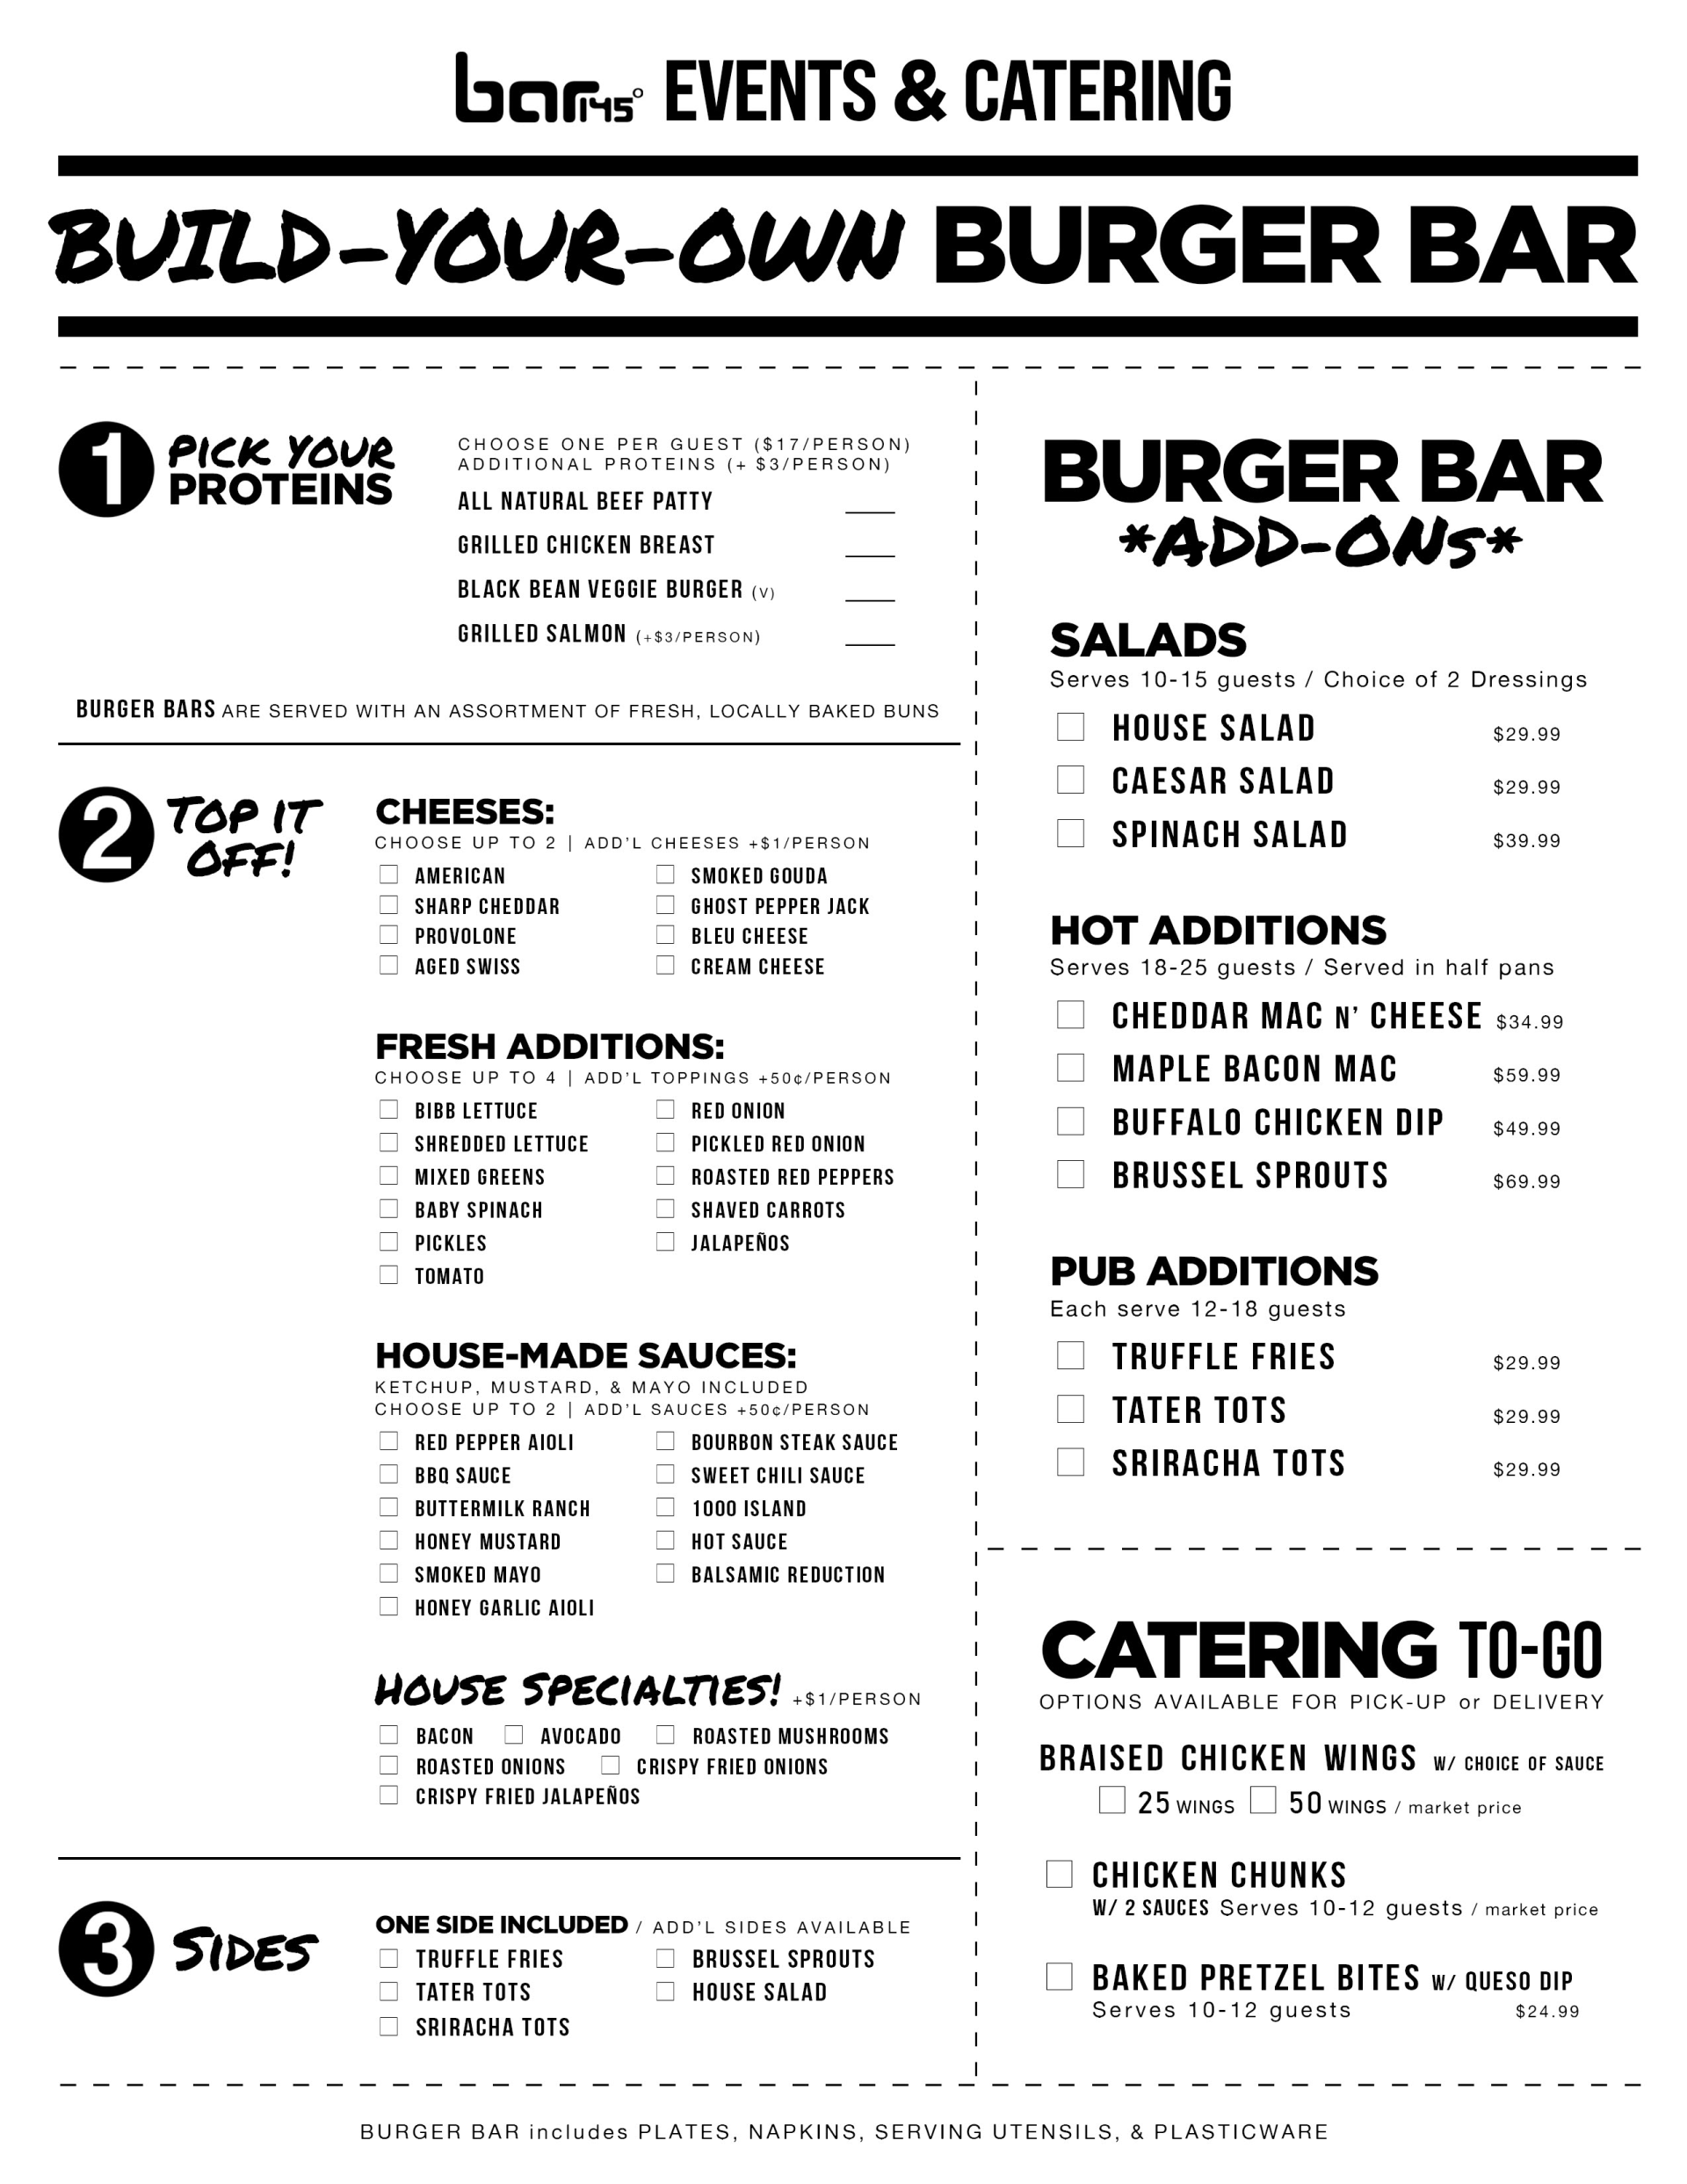 Bar 145 Events and Catering - Burger Bar